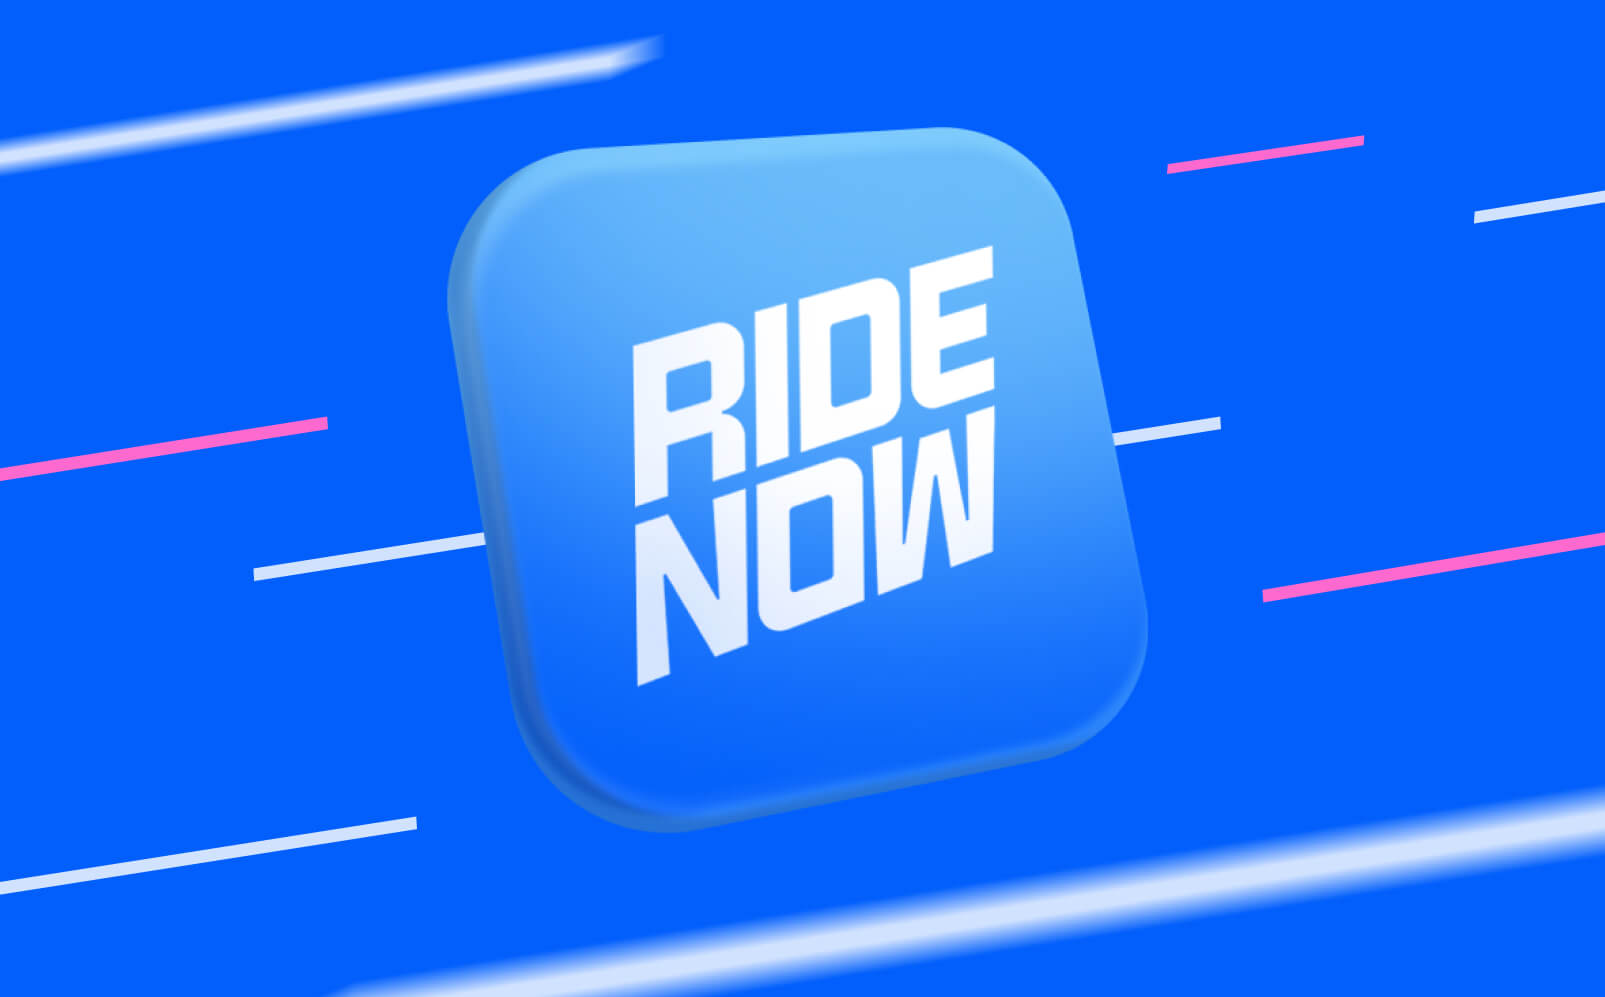 Bar Creates Ride Now Brand Identity and Website Development and Design